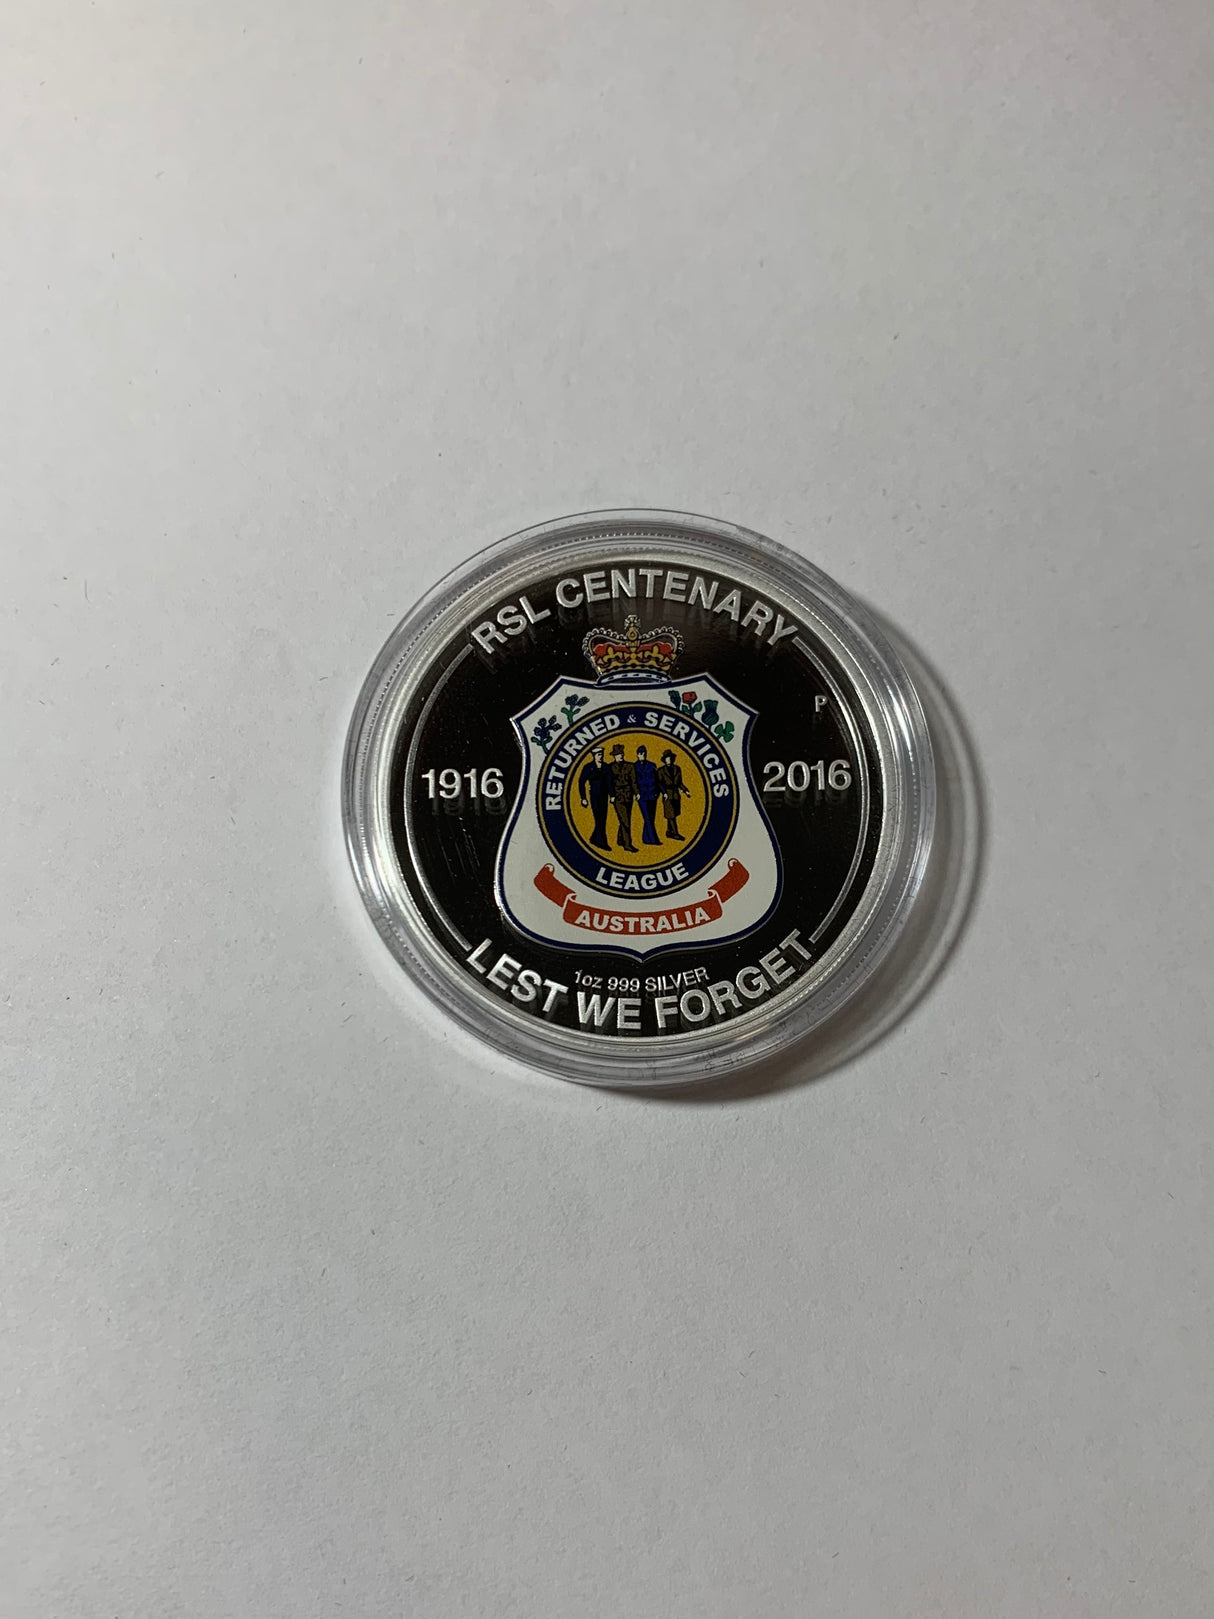 2016 $1 1oz Silver Proof Coin. Returned and Services League of Australian Centenary Coin.